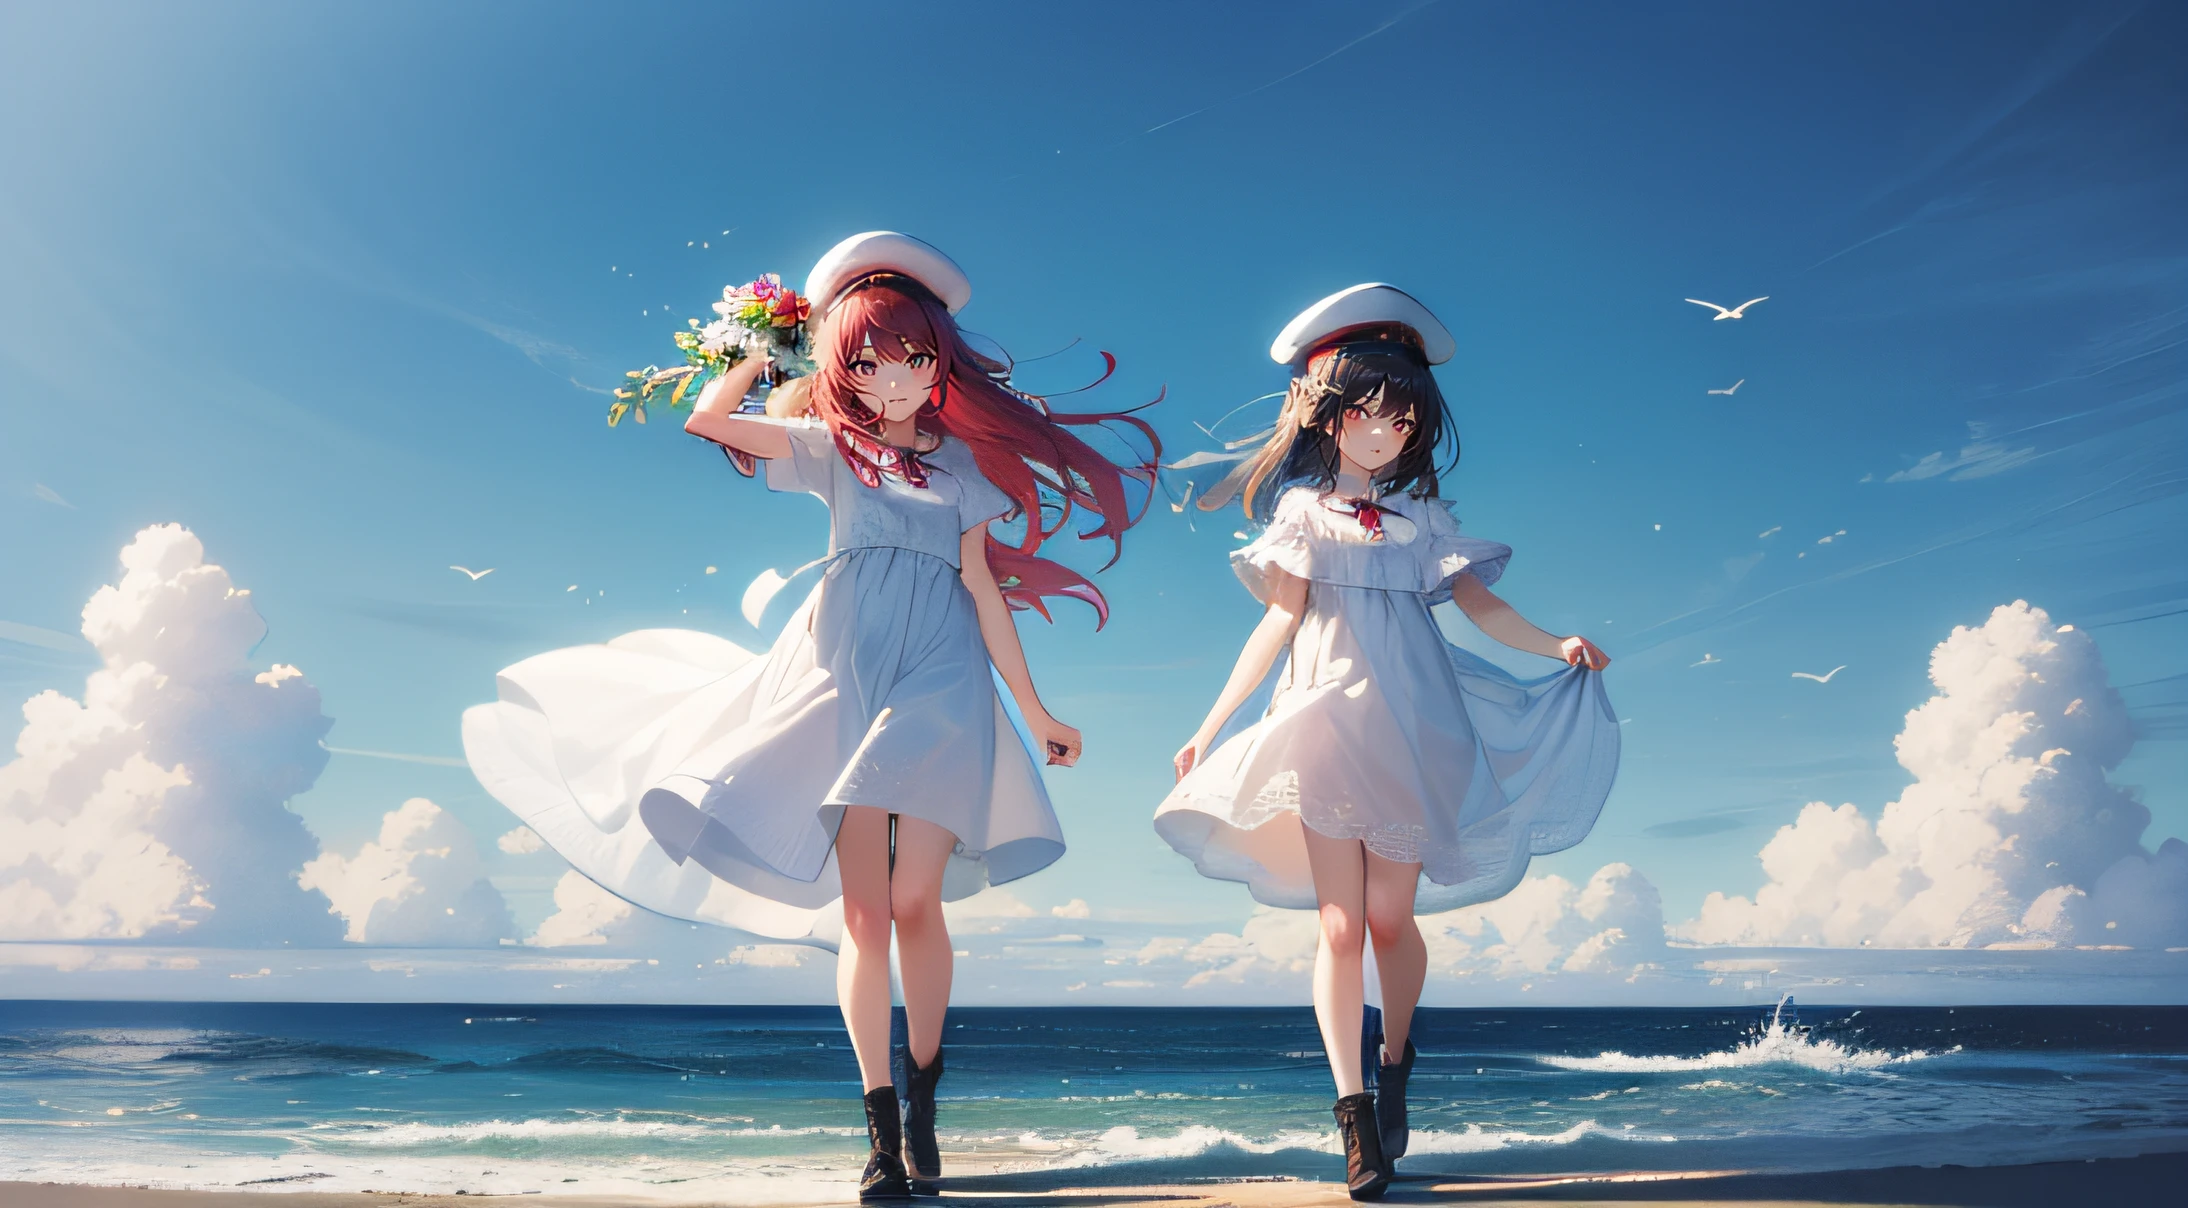 masterpiece, high definition, 2girl, sisters, sibling with red hair and black hair, handing flower, sea, adult, mature, white dress, commander cap, sexy, full body, black boots, red leggings